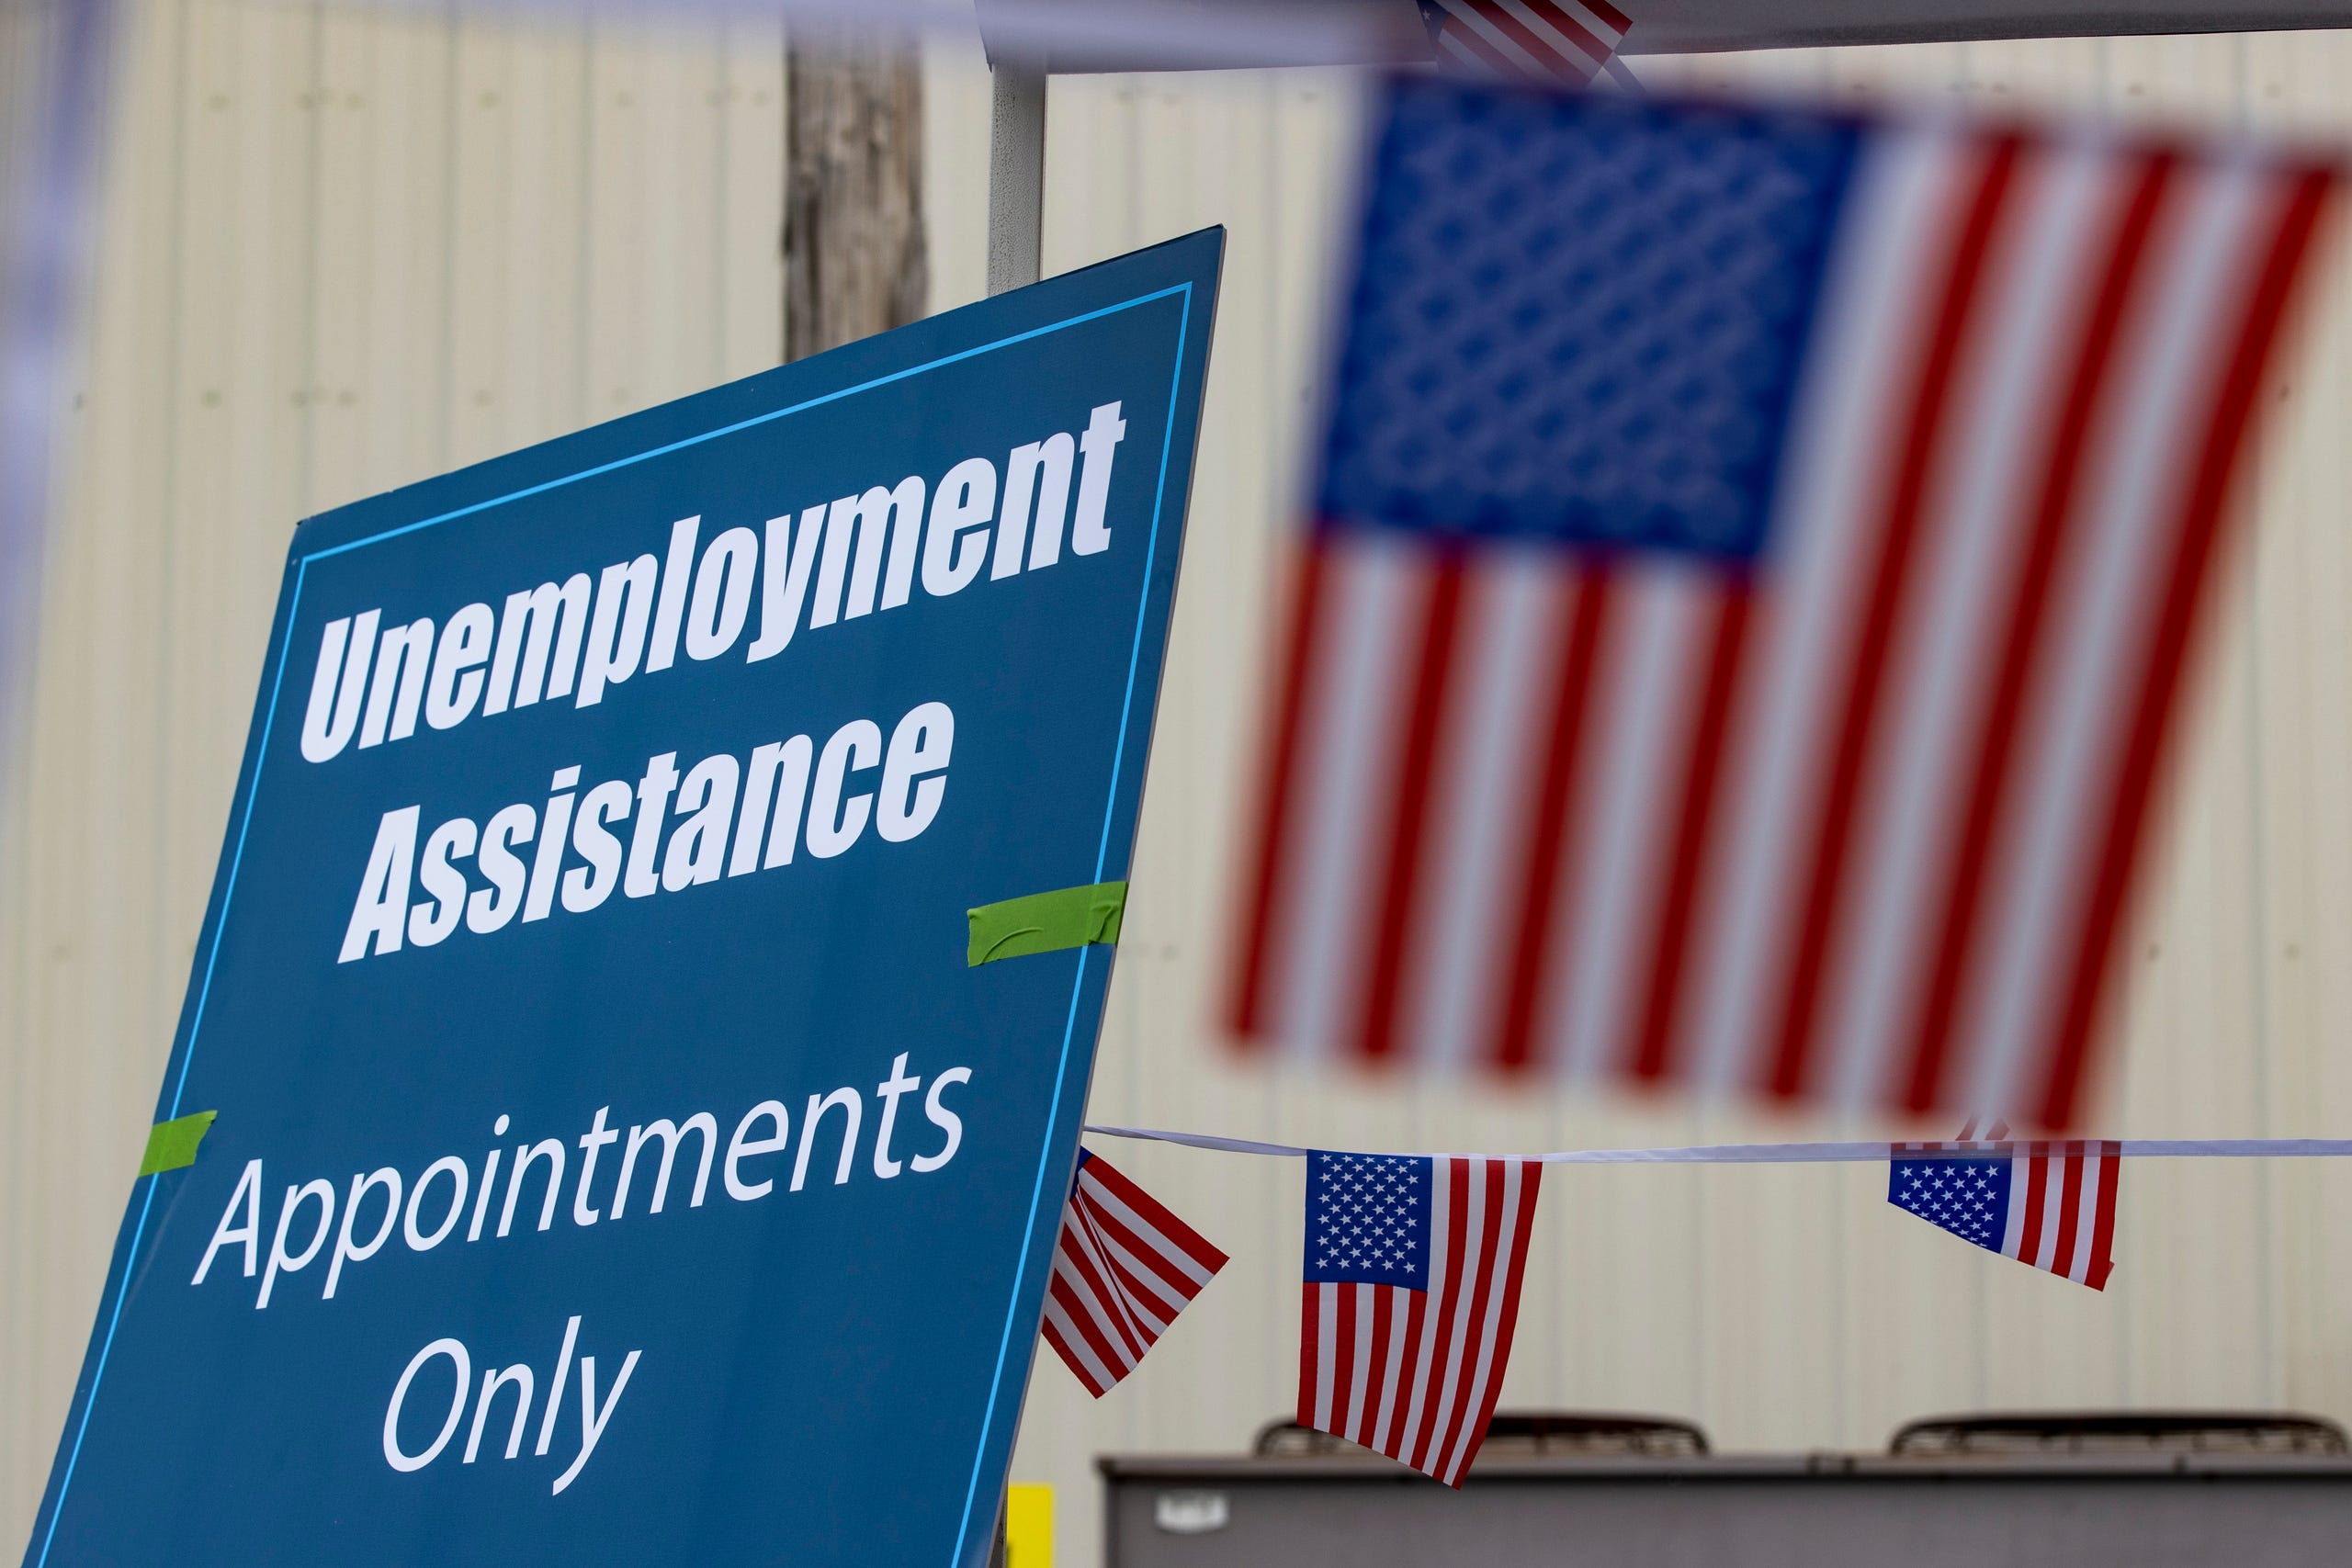 Signage for unemployment assistance at the UAW Local 862. August 3, 2020